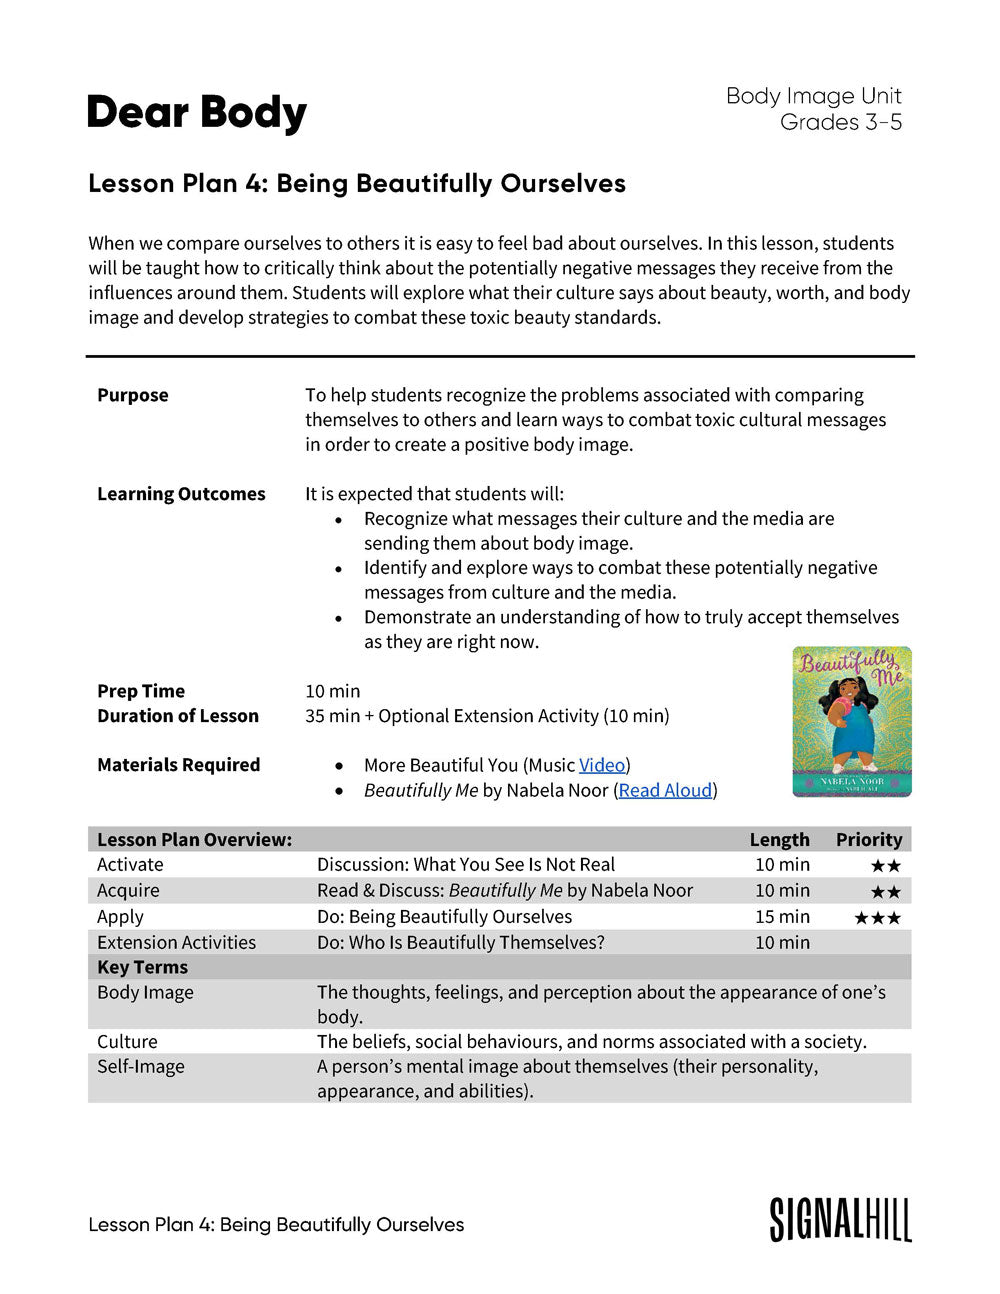 Lesson Plan 4: Being Beautifully Ourselves